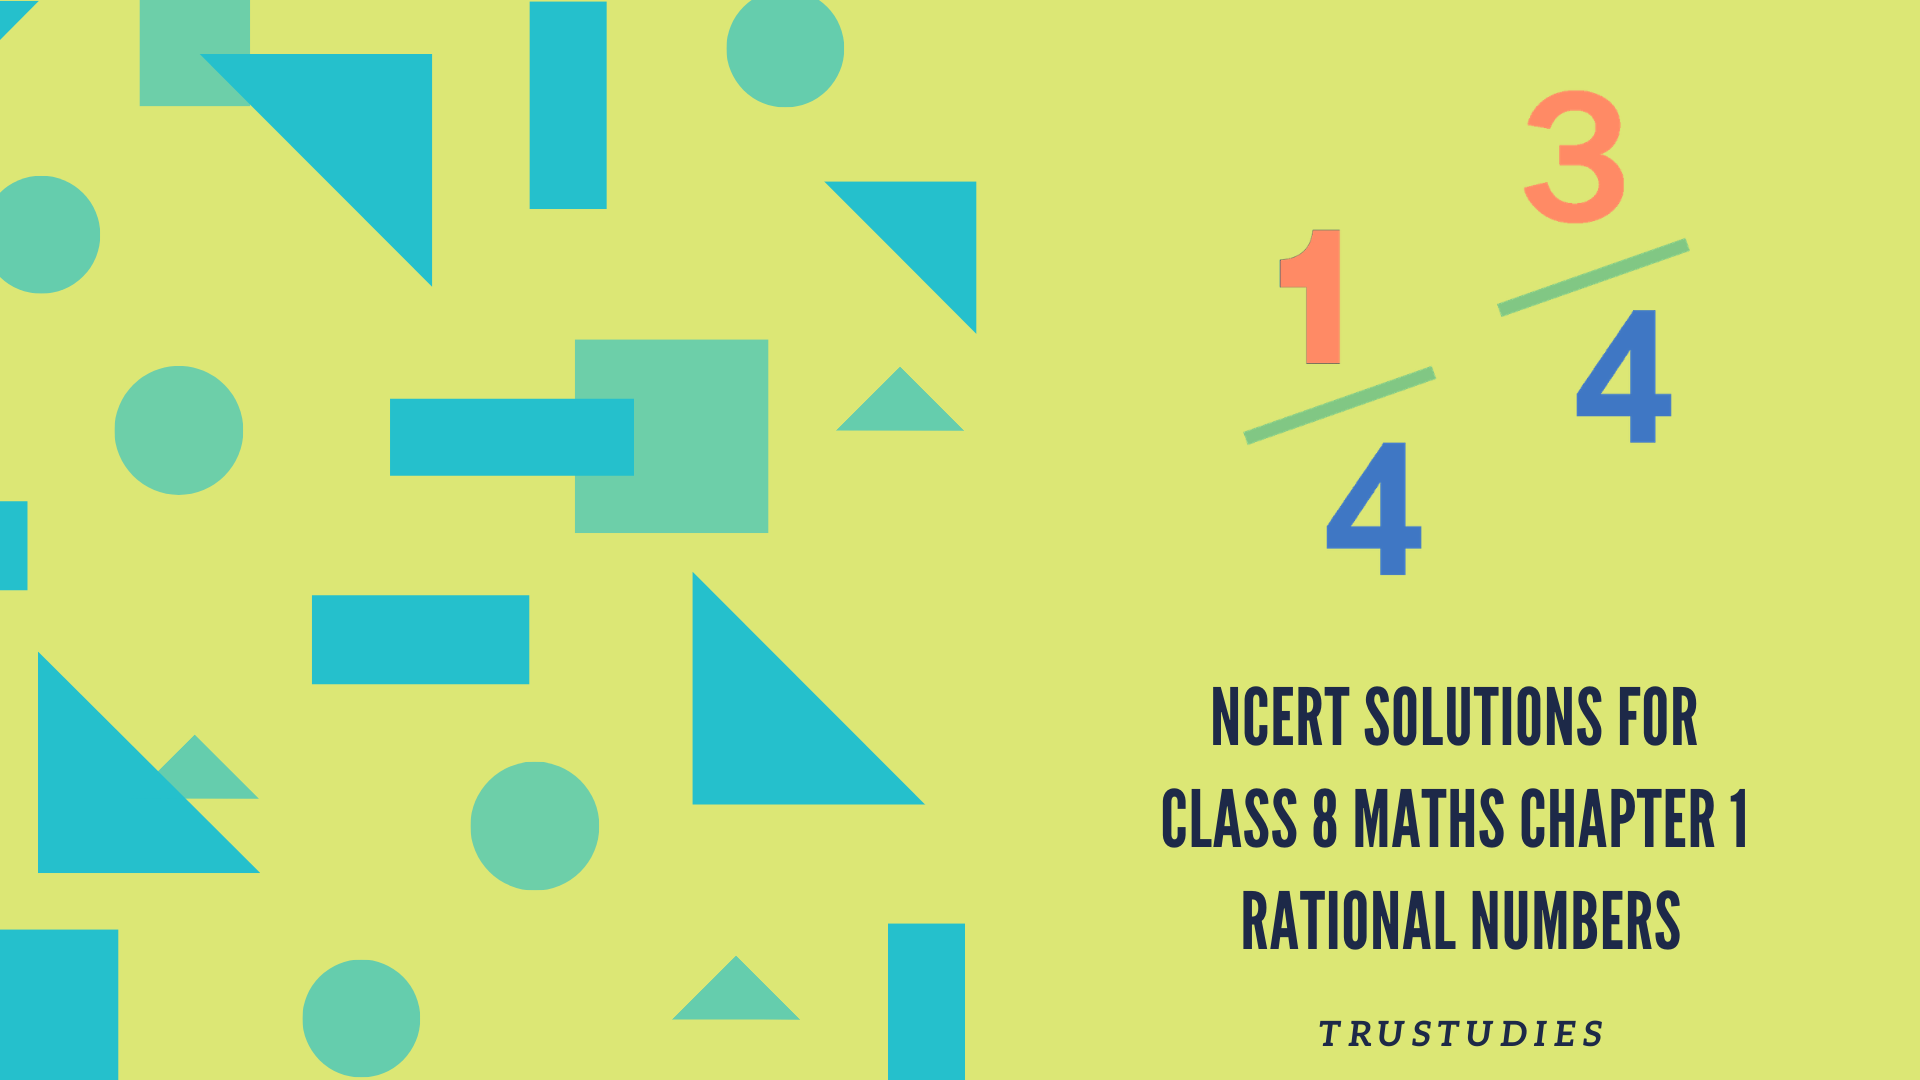 NCERT solutions for class 8 maths chapter 1 rational numbers banner image